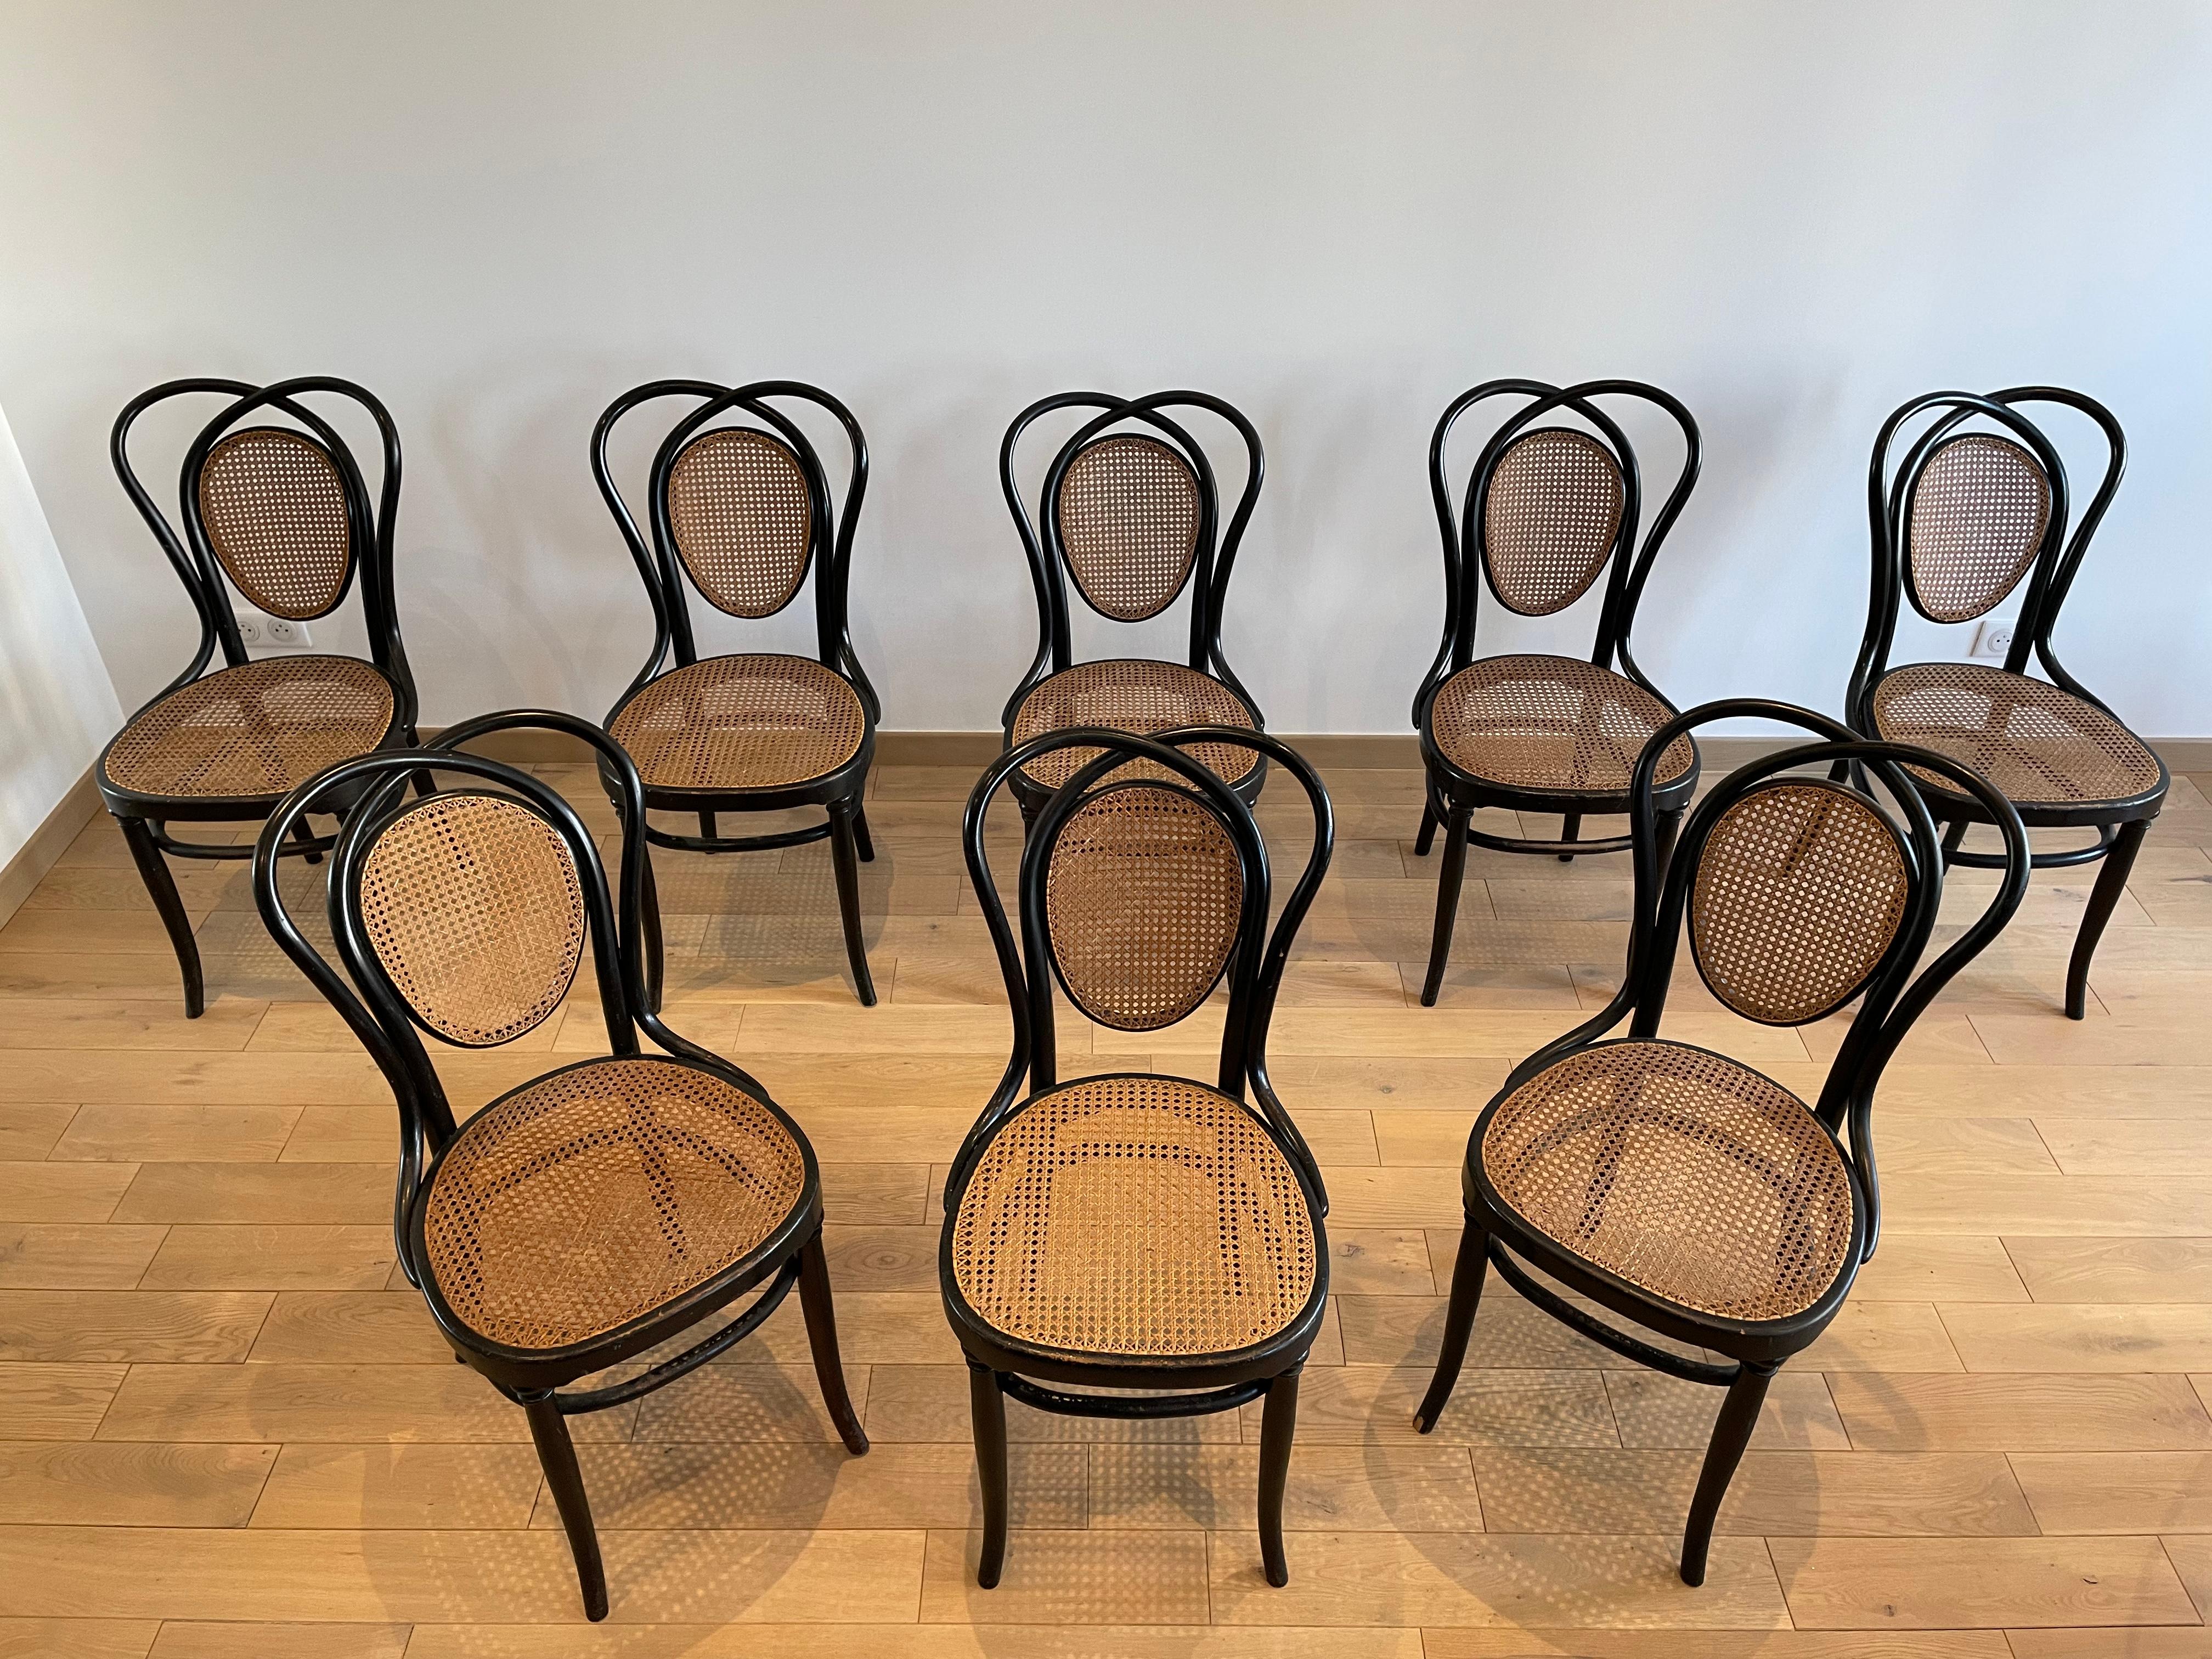 Set of 8 Viennese bentwood chairs, model N.33 by Jacob & Joseph Kohn and dating from the years 1890 - 1900. Structures and caning of all the chairs are in good condition (photos). Handmade caning. All chairs are stamped and stamped.
Dimensions :